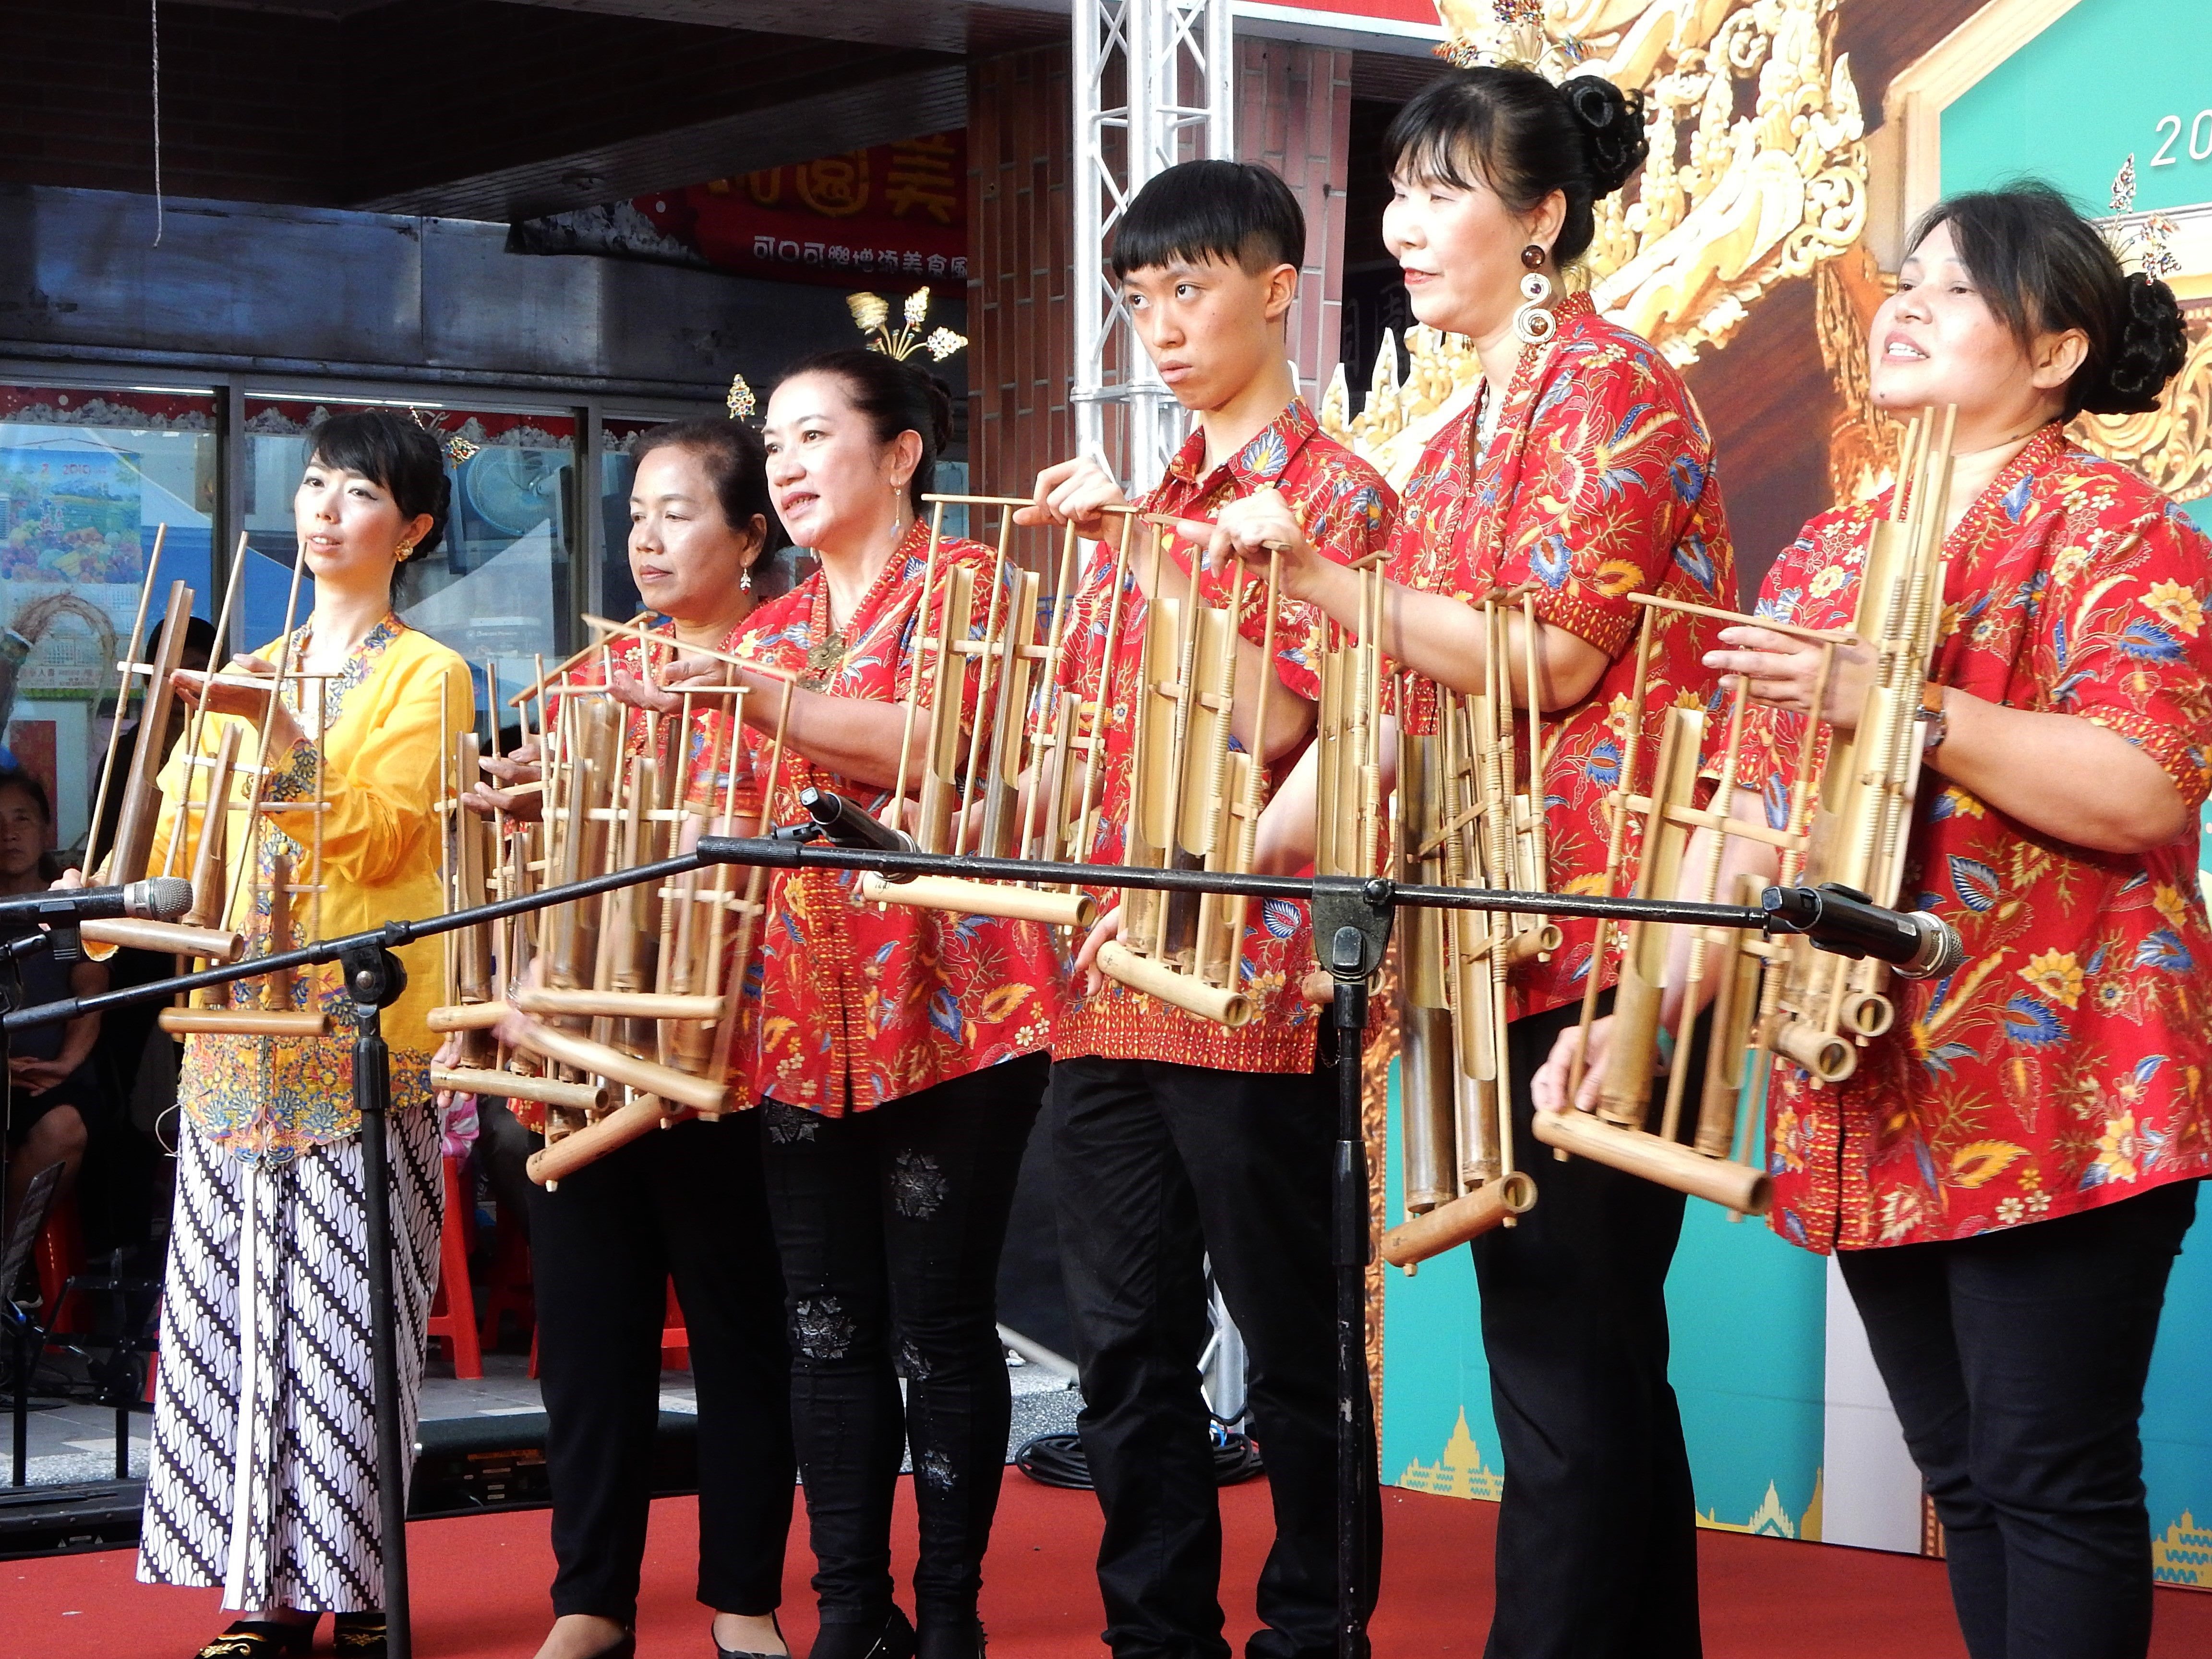 Gema Angklung group concentrate on performing Angklung